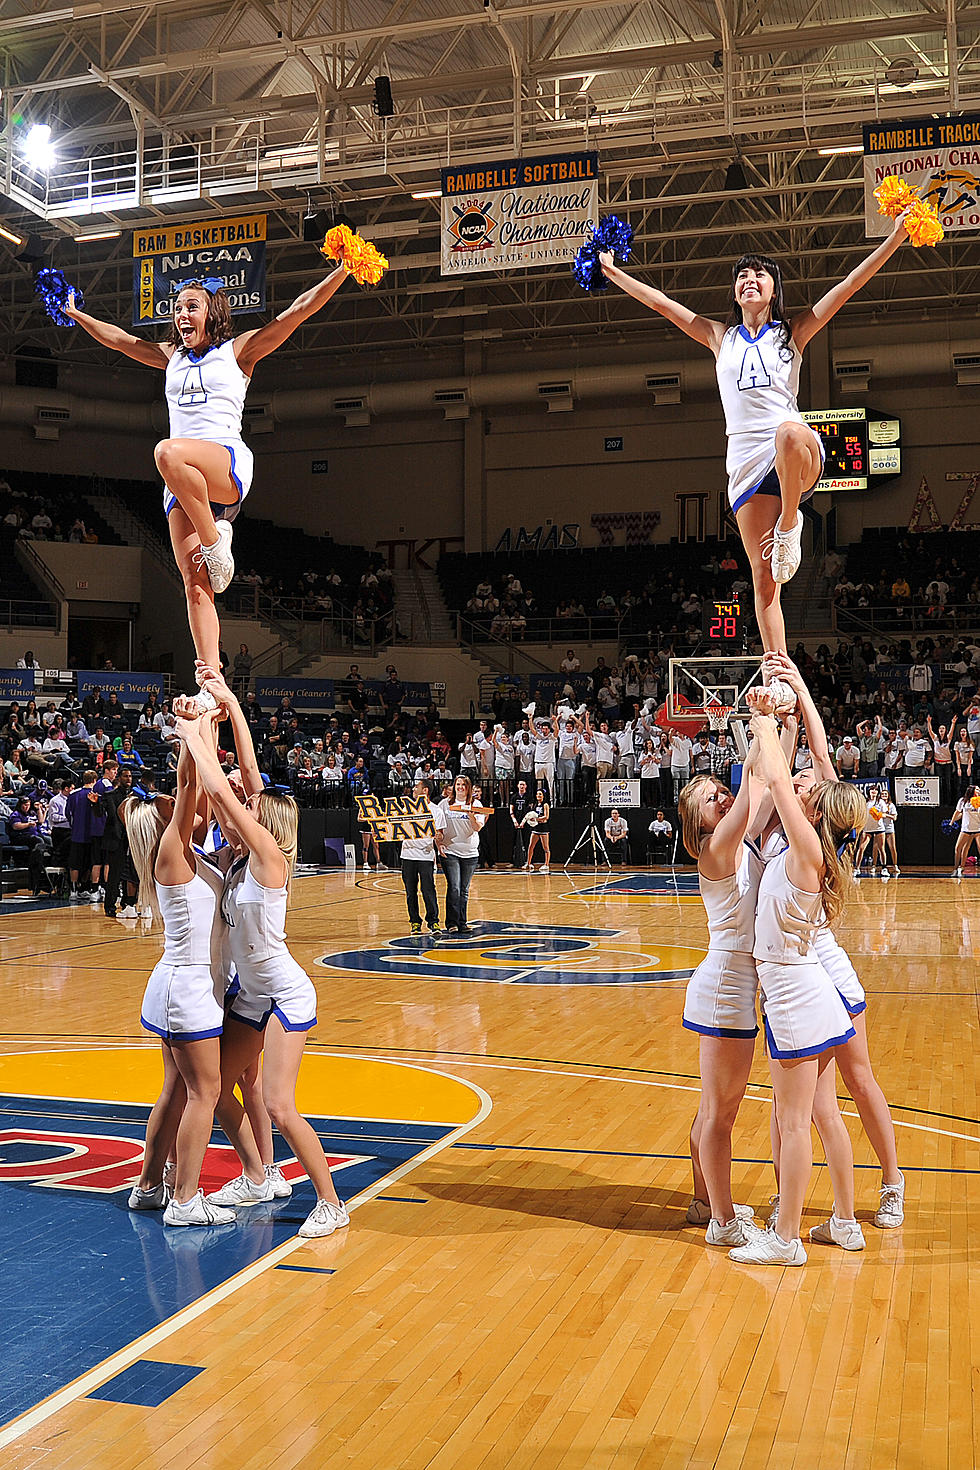 Angelo State and the American Cancer Society Partner Up for ‘White Out Cancer Night’